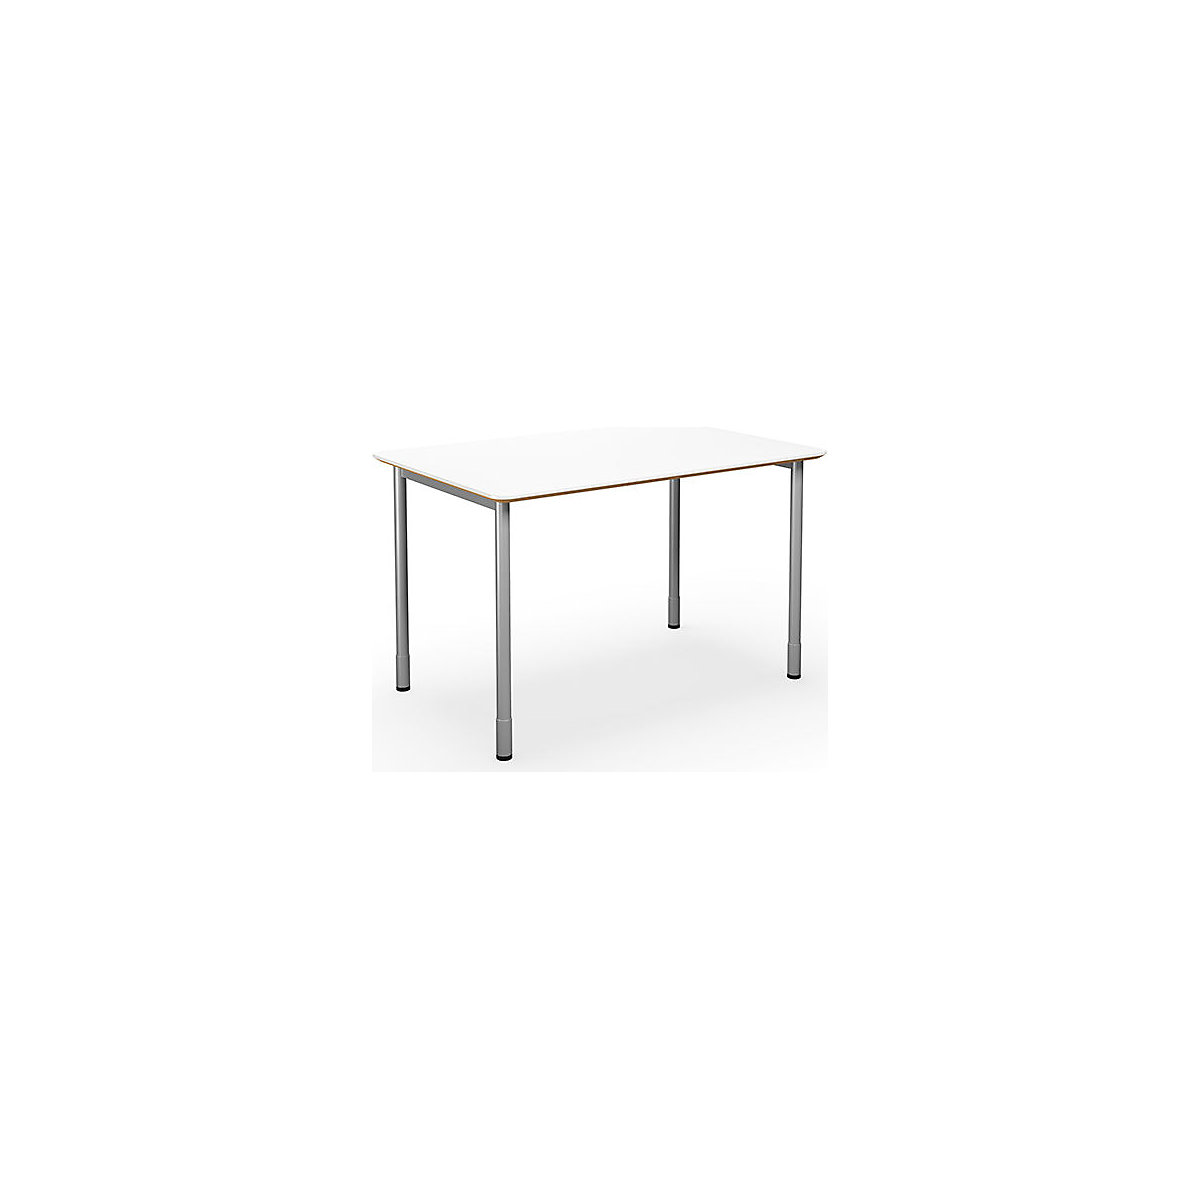 DUO-C Trend multi-purpose desk, straight tabletop, rounded corners, WxD 1200 x 800 mm, white, silver-3